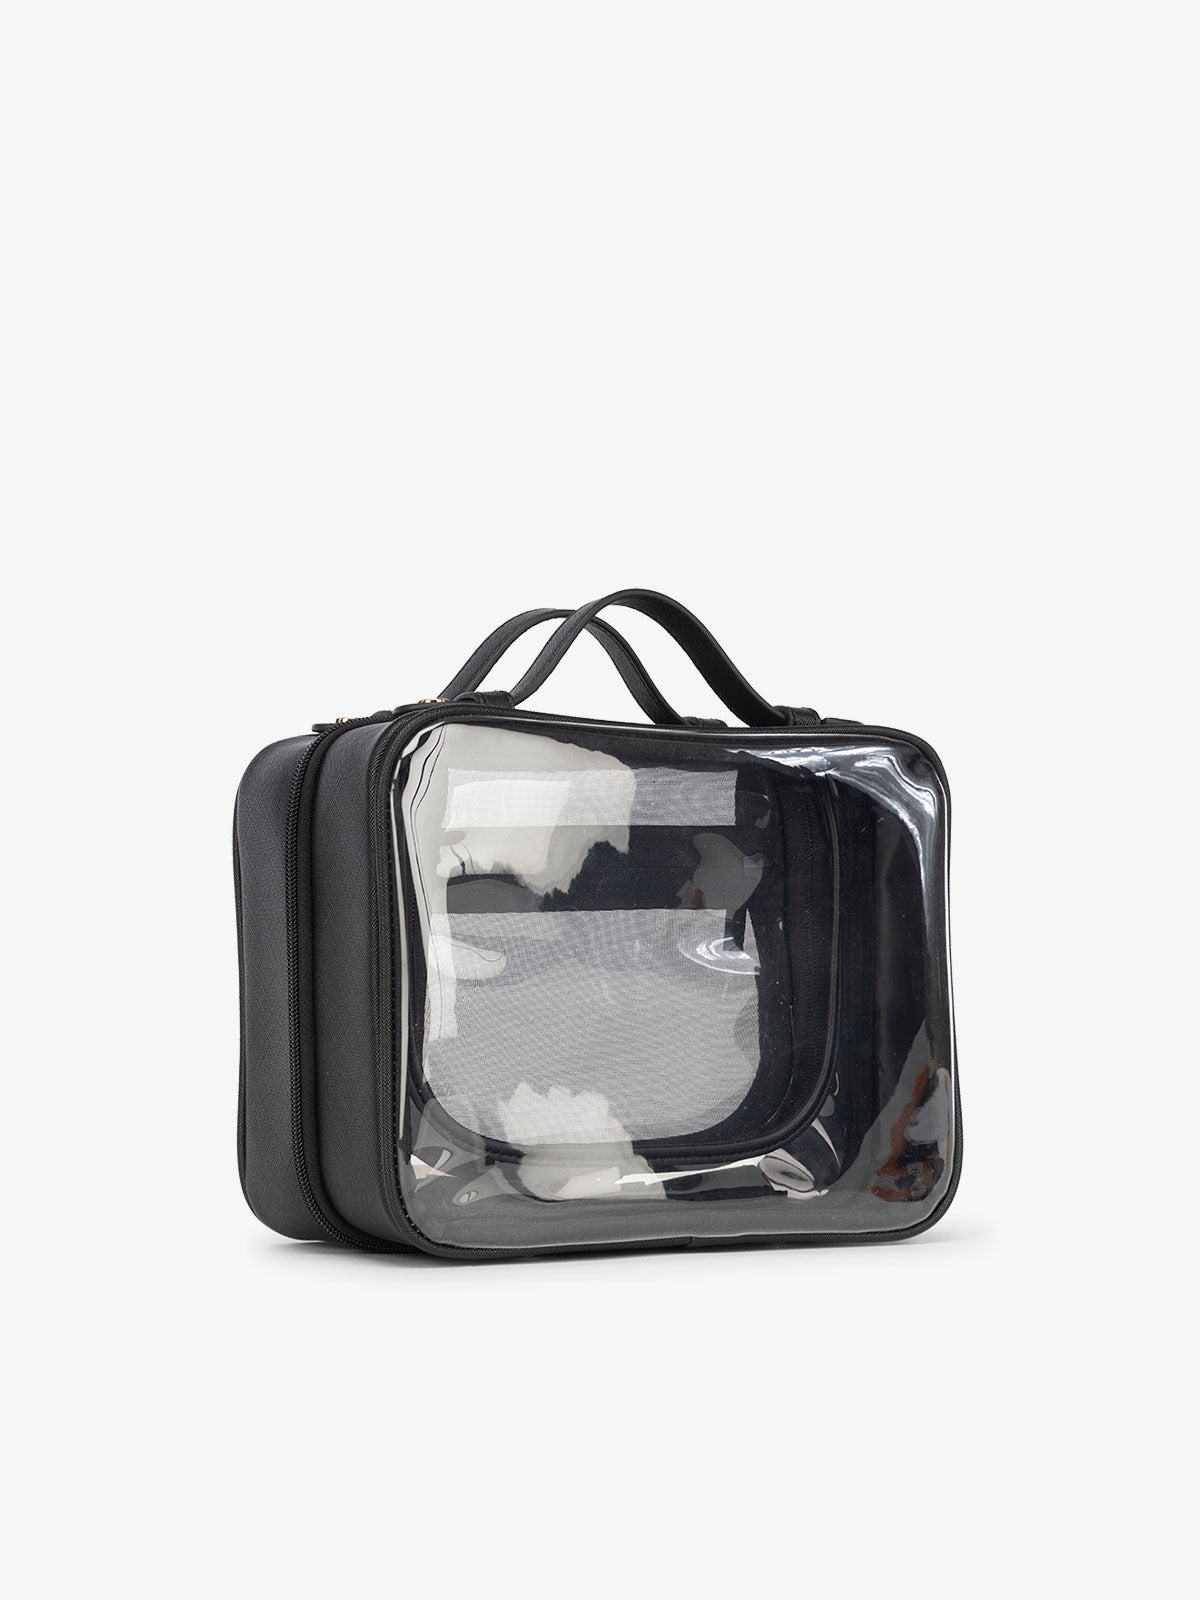 CALPAK medium clear cosmetics case with sturdy handles for travel in black